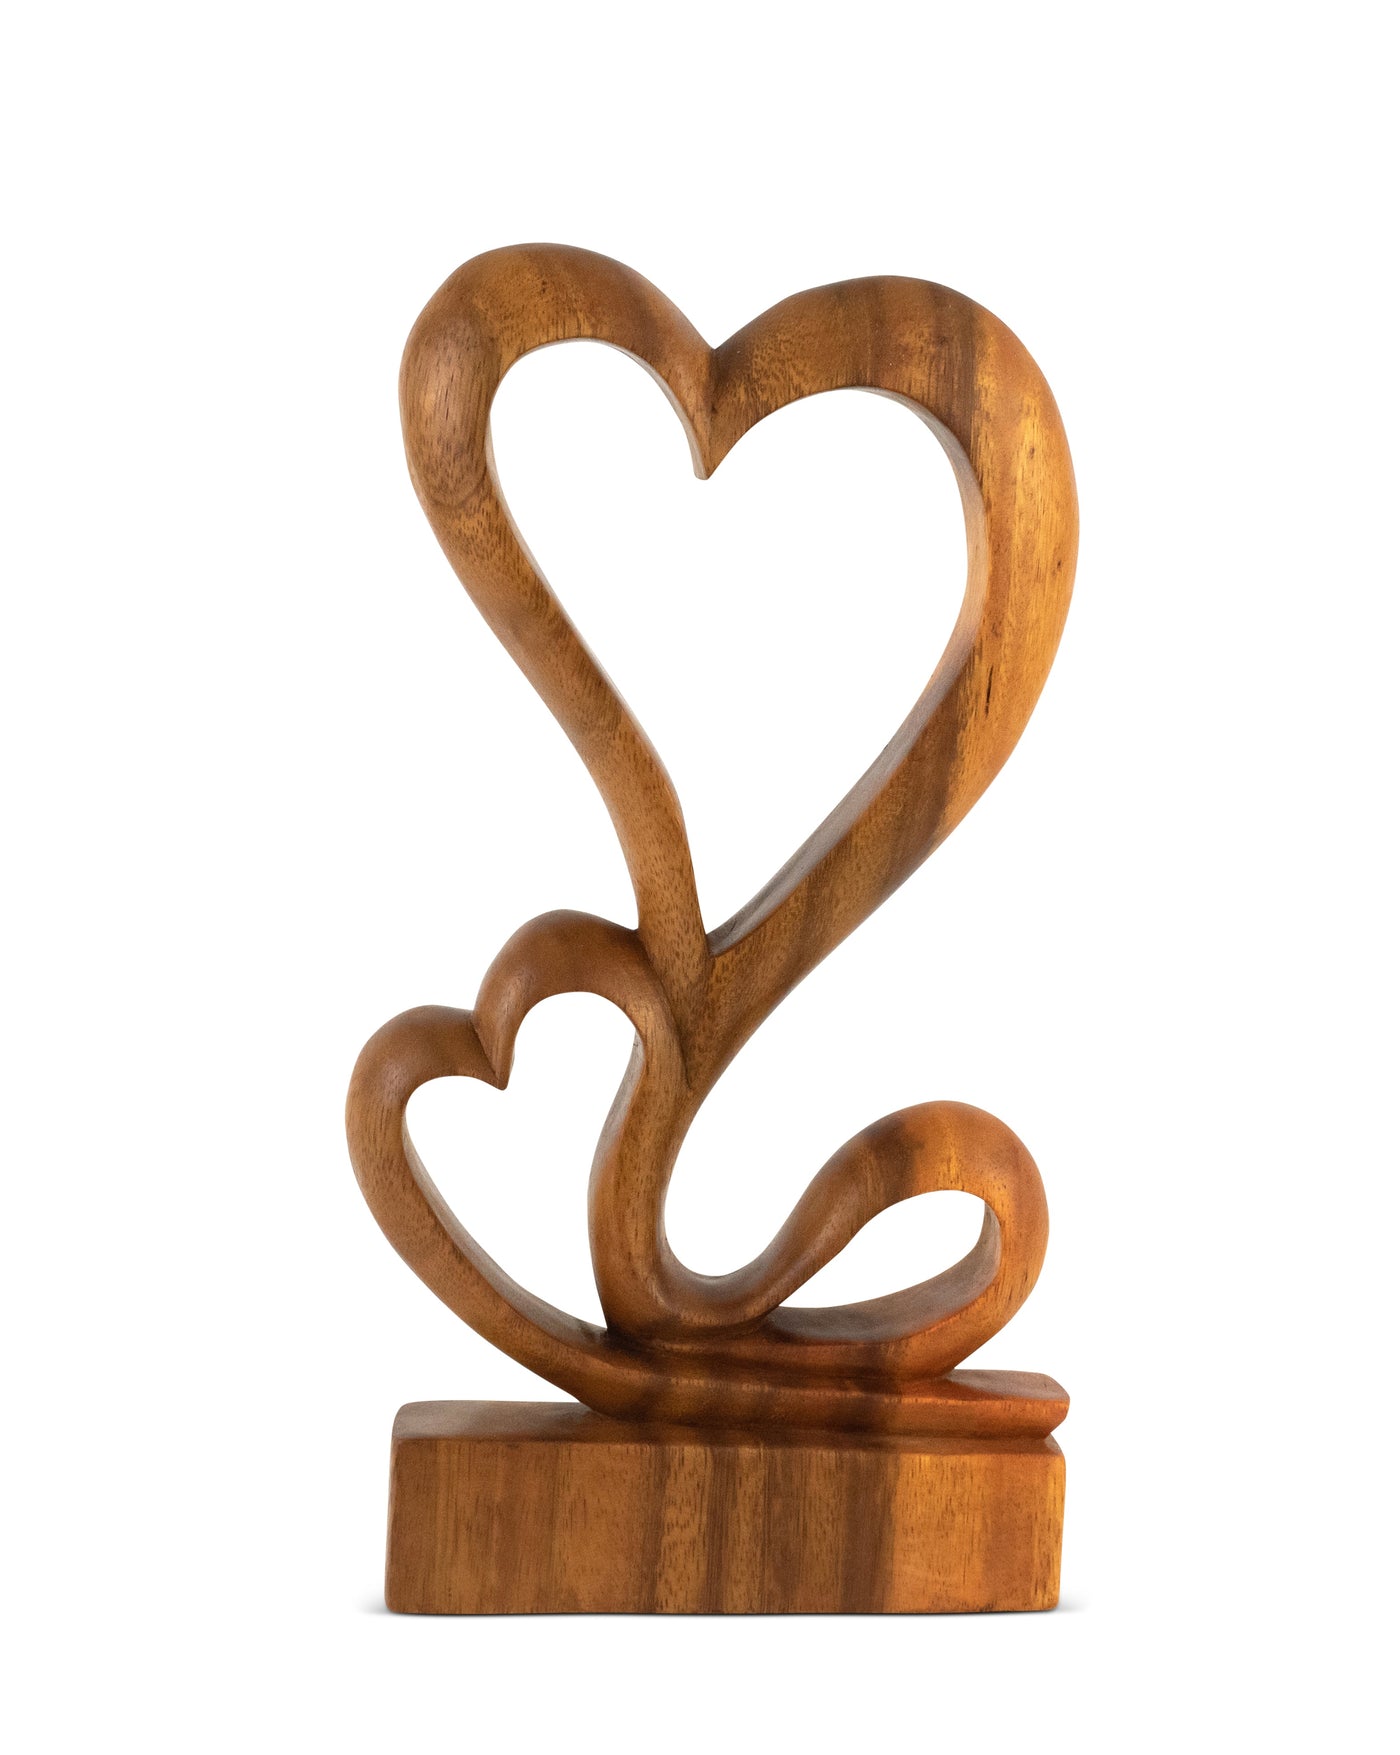 12" Wooden Handmade Abstract Sculpture Statue Handcrafted "Hearts Blossom" Gift Decorative Home Decor Figurine Accent Decoration Artwork Hand Carved